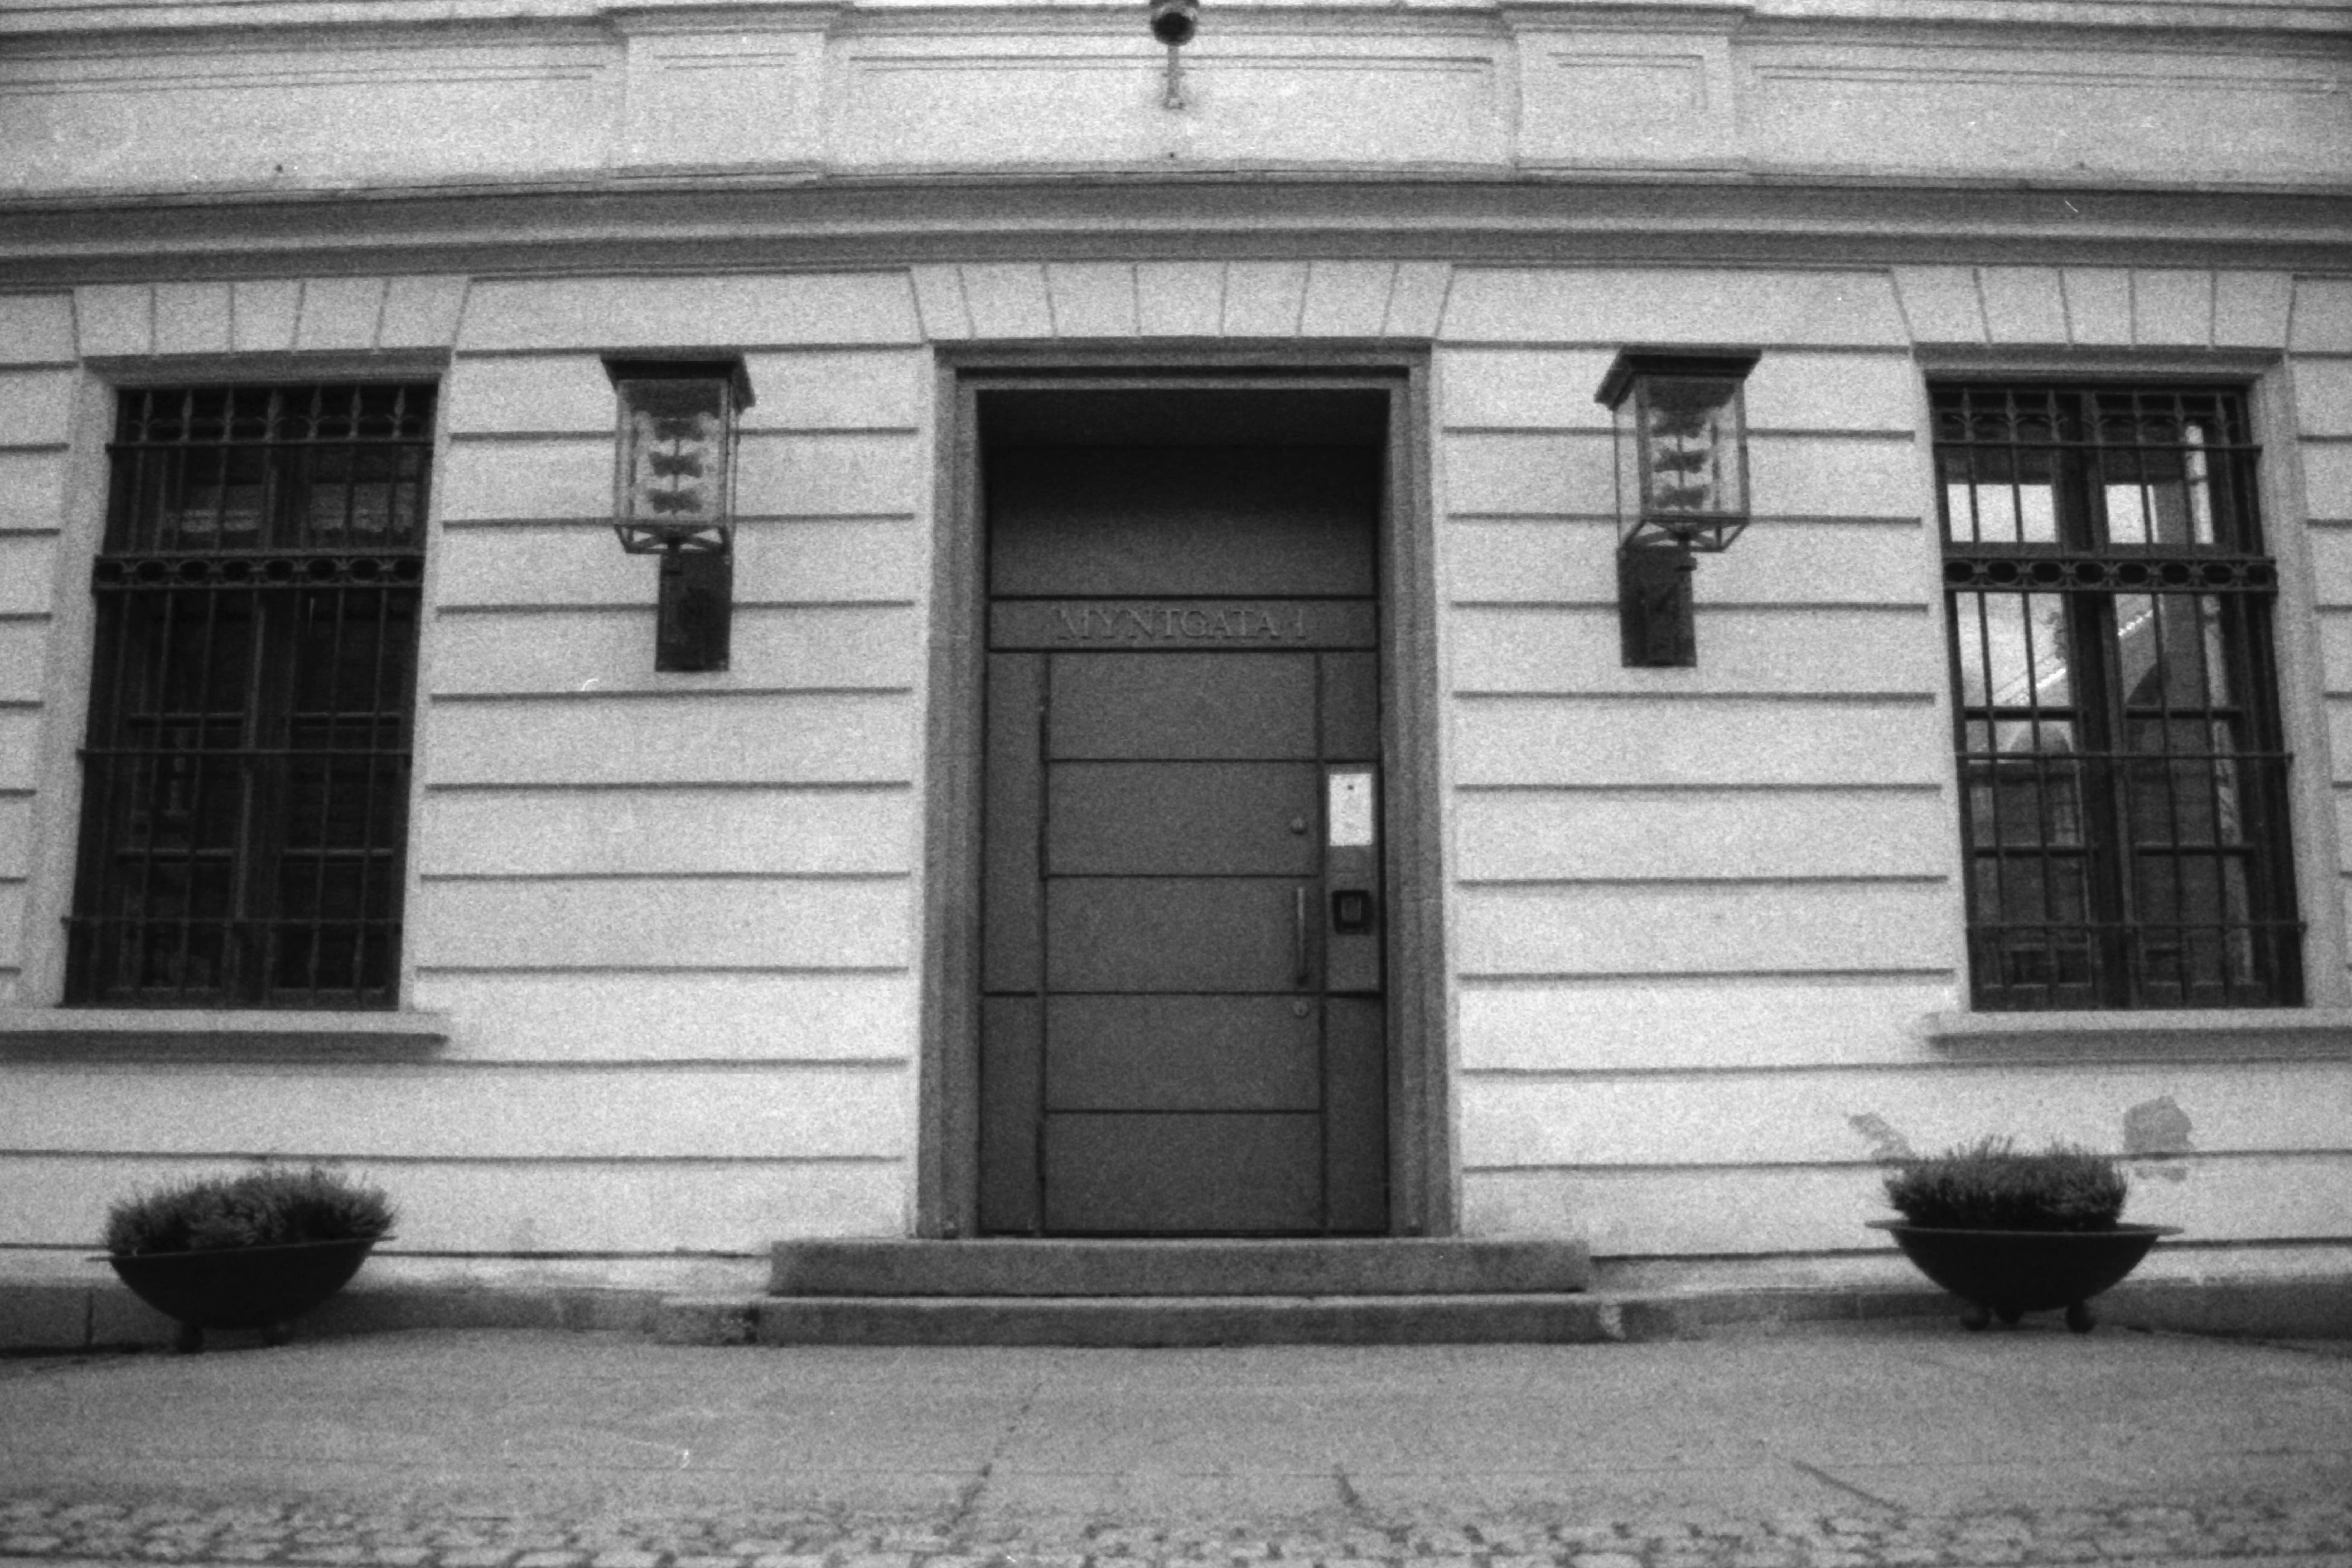 Black and white picture of an entrance to a building featurintg two barred windows, two lamps and a door with the text “Myntegata 1”